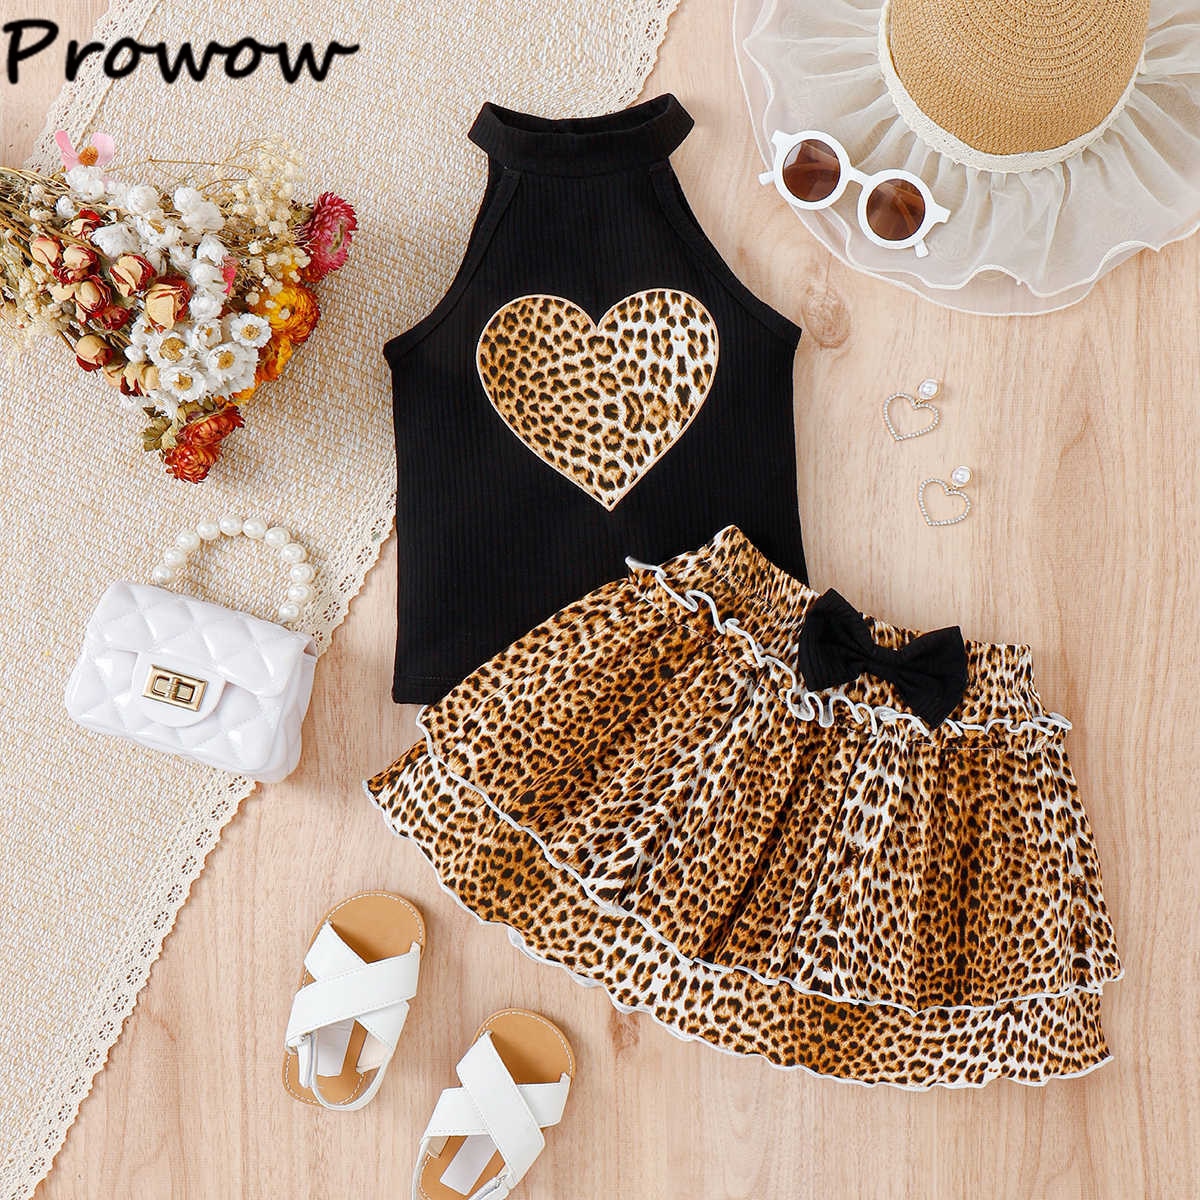 Prowow-4-7Y-Children-Skirts-Sets-For-Girls-Halter-Heart-Top-and-Frill-Cake-Skirt-Leopard-1